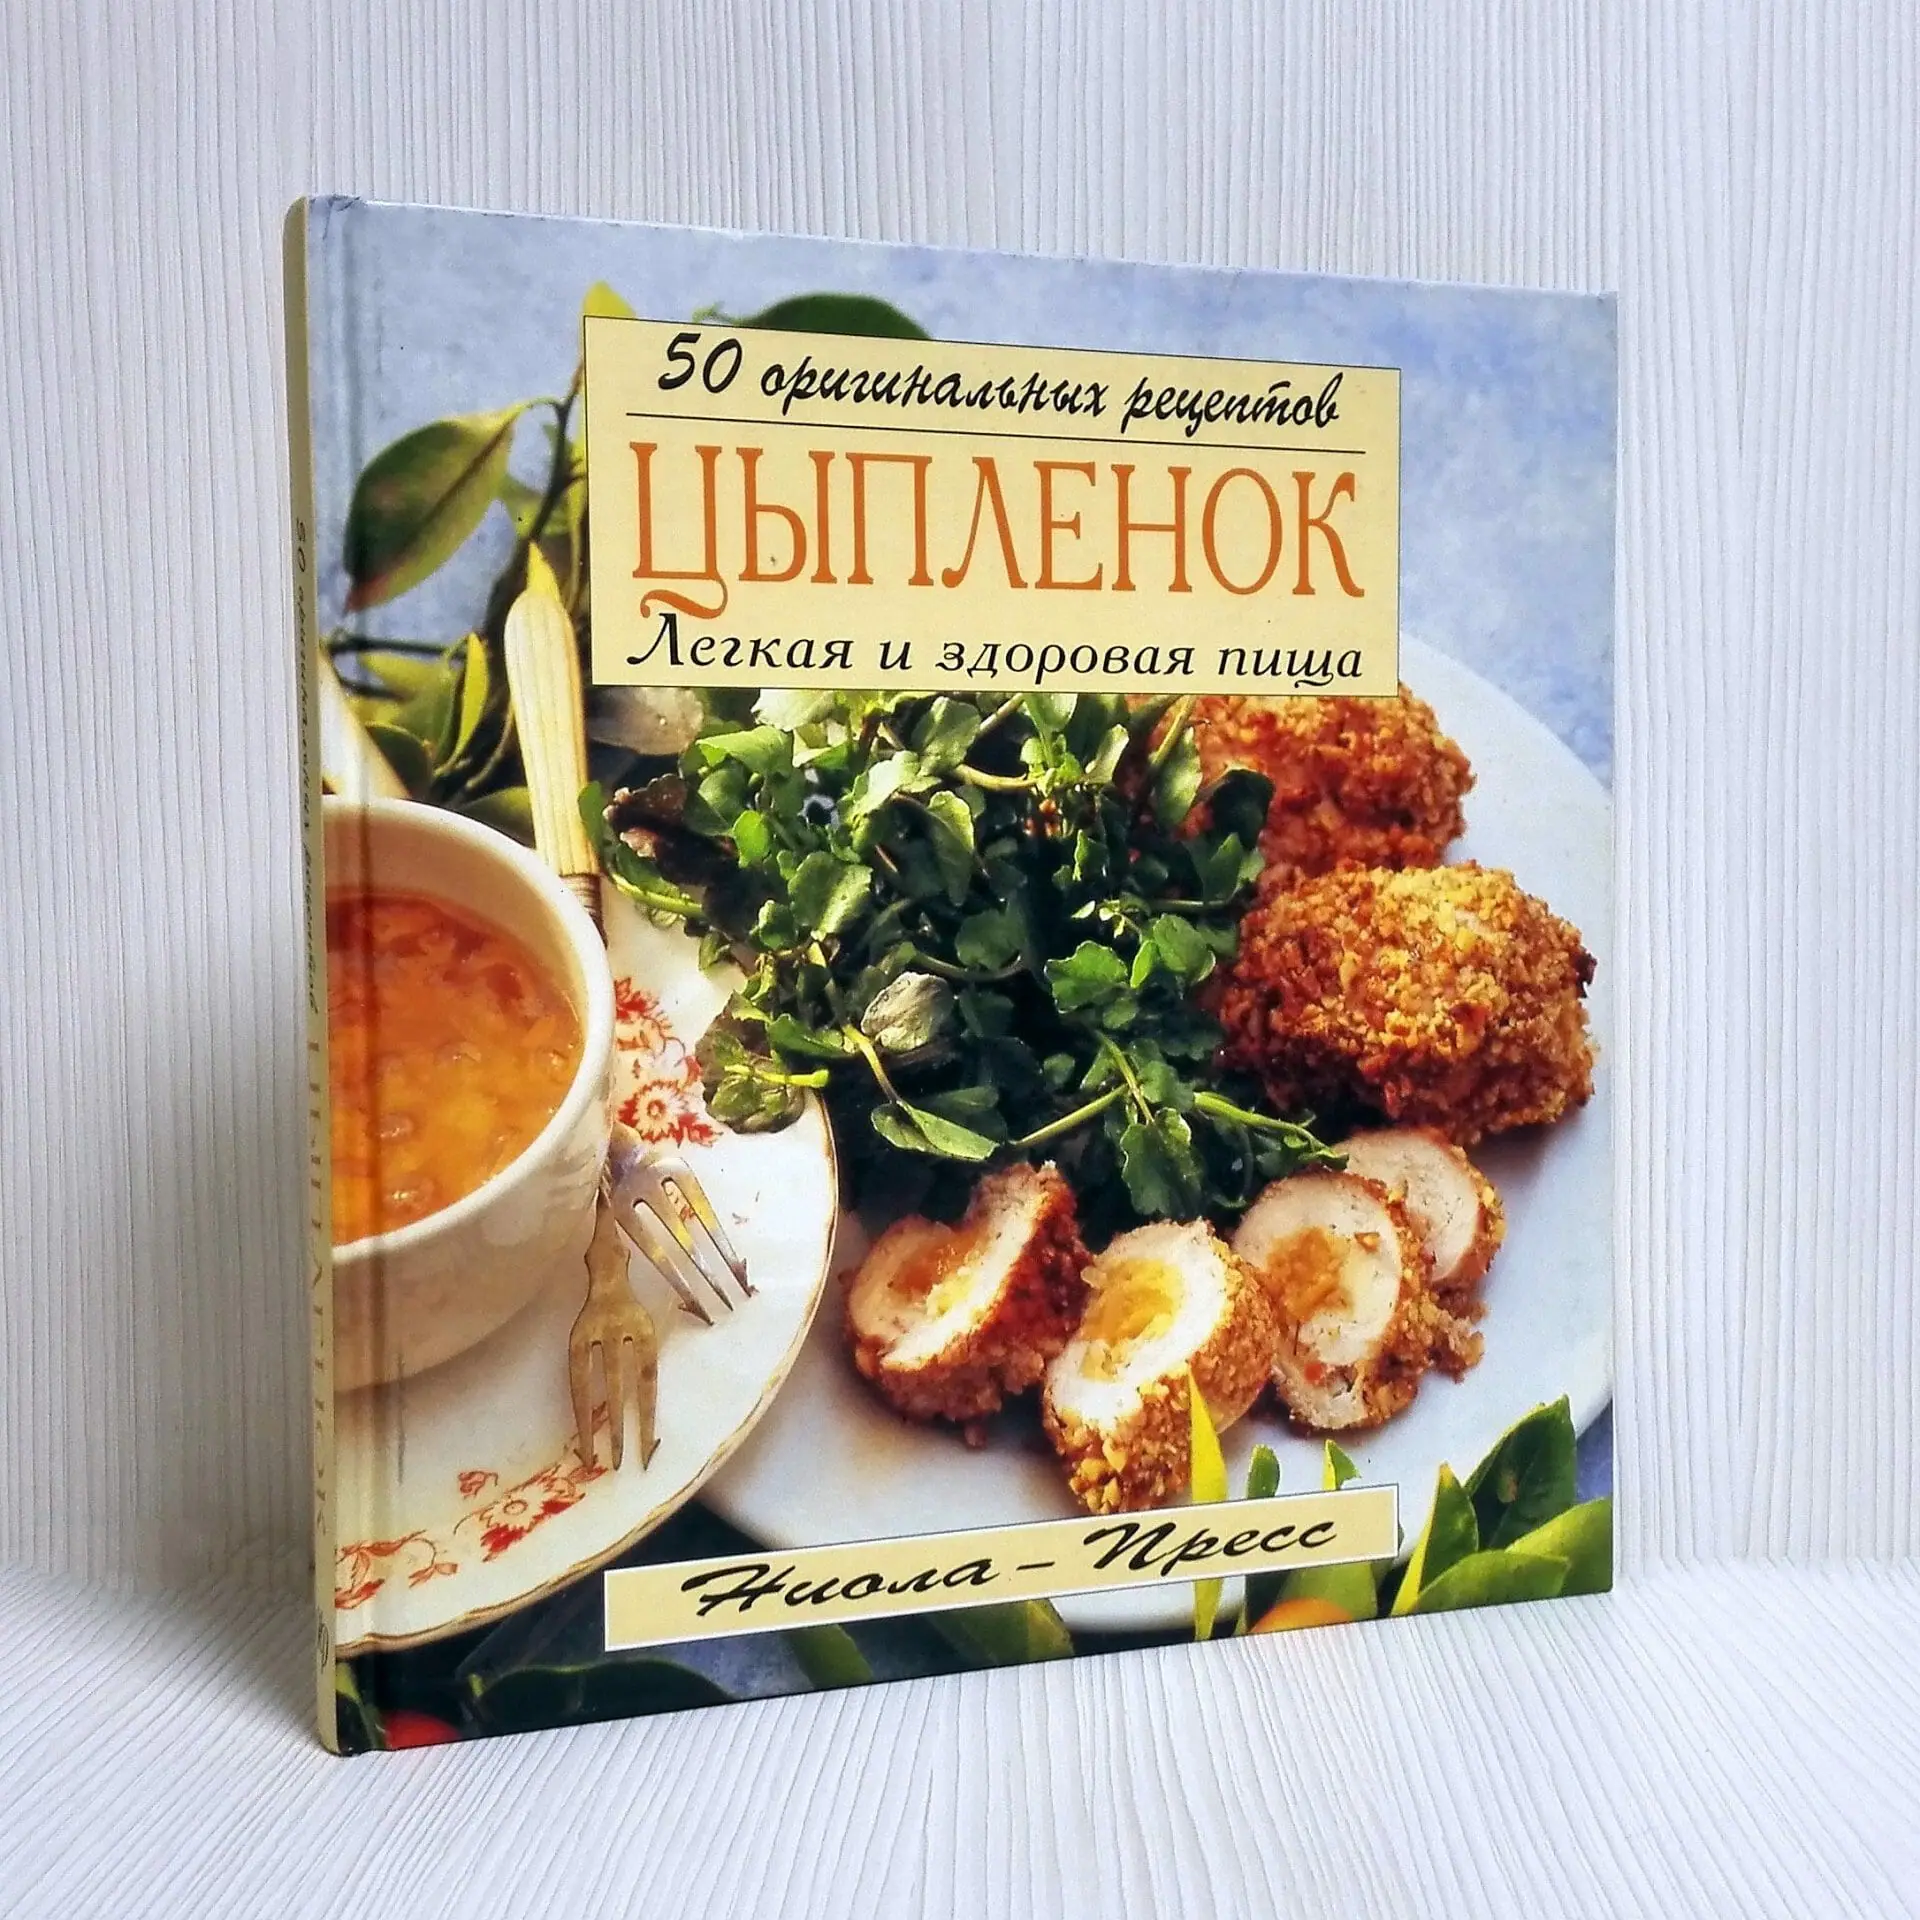 Vintage book Chick – Light and healthy food. 50 original recipes